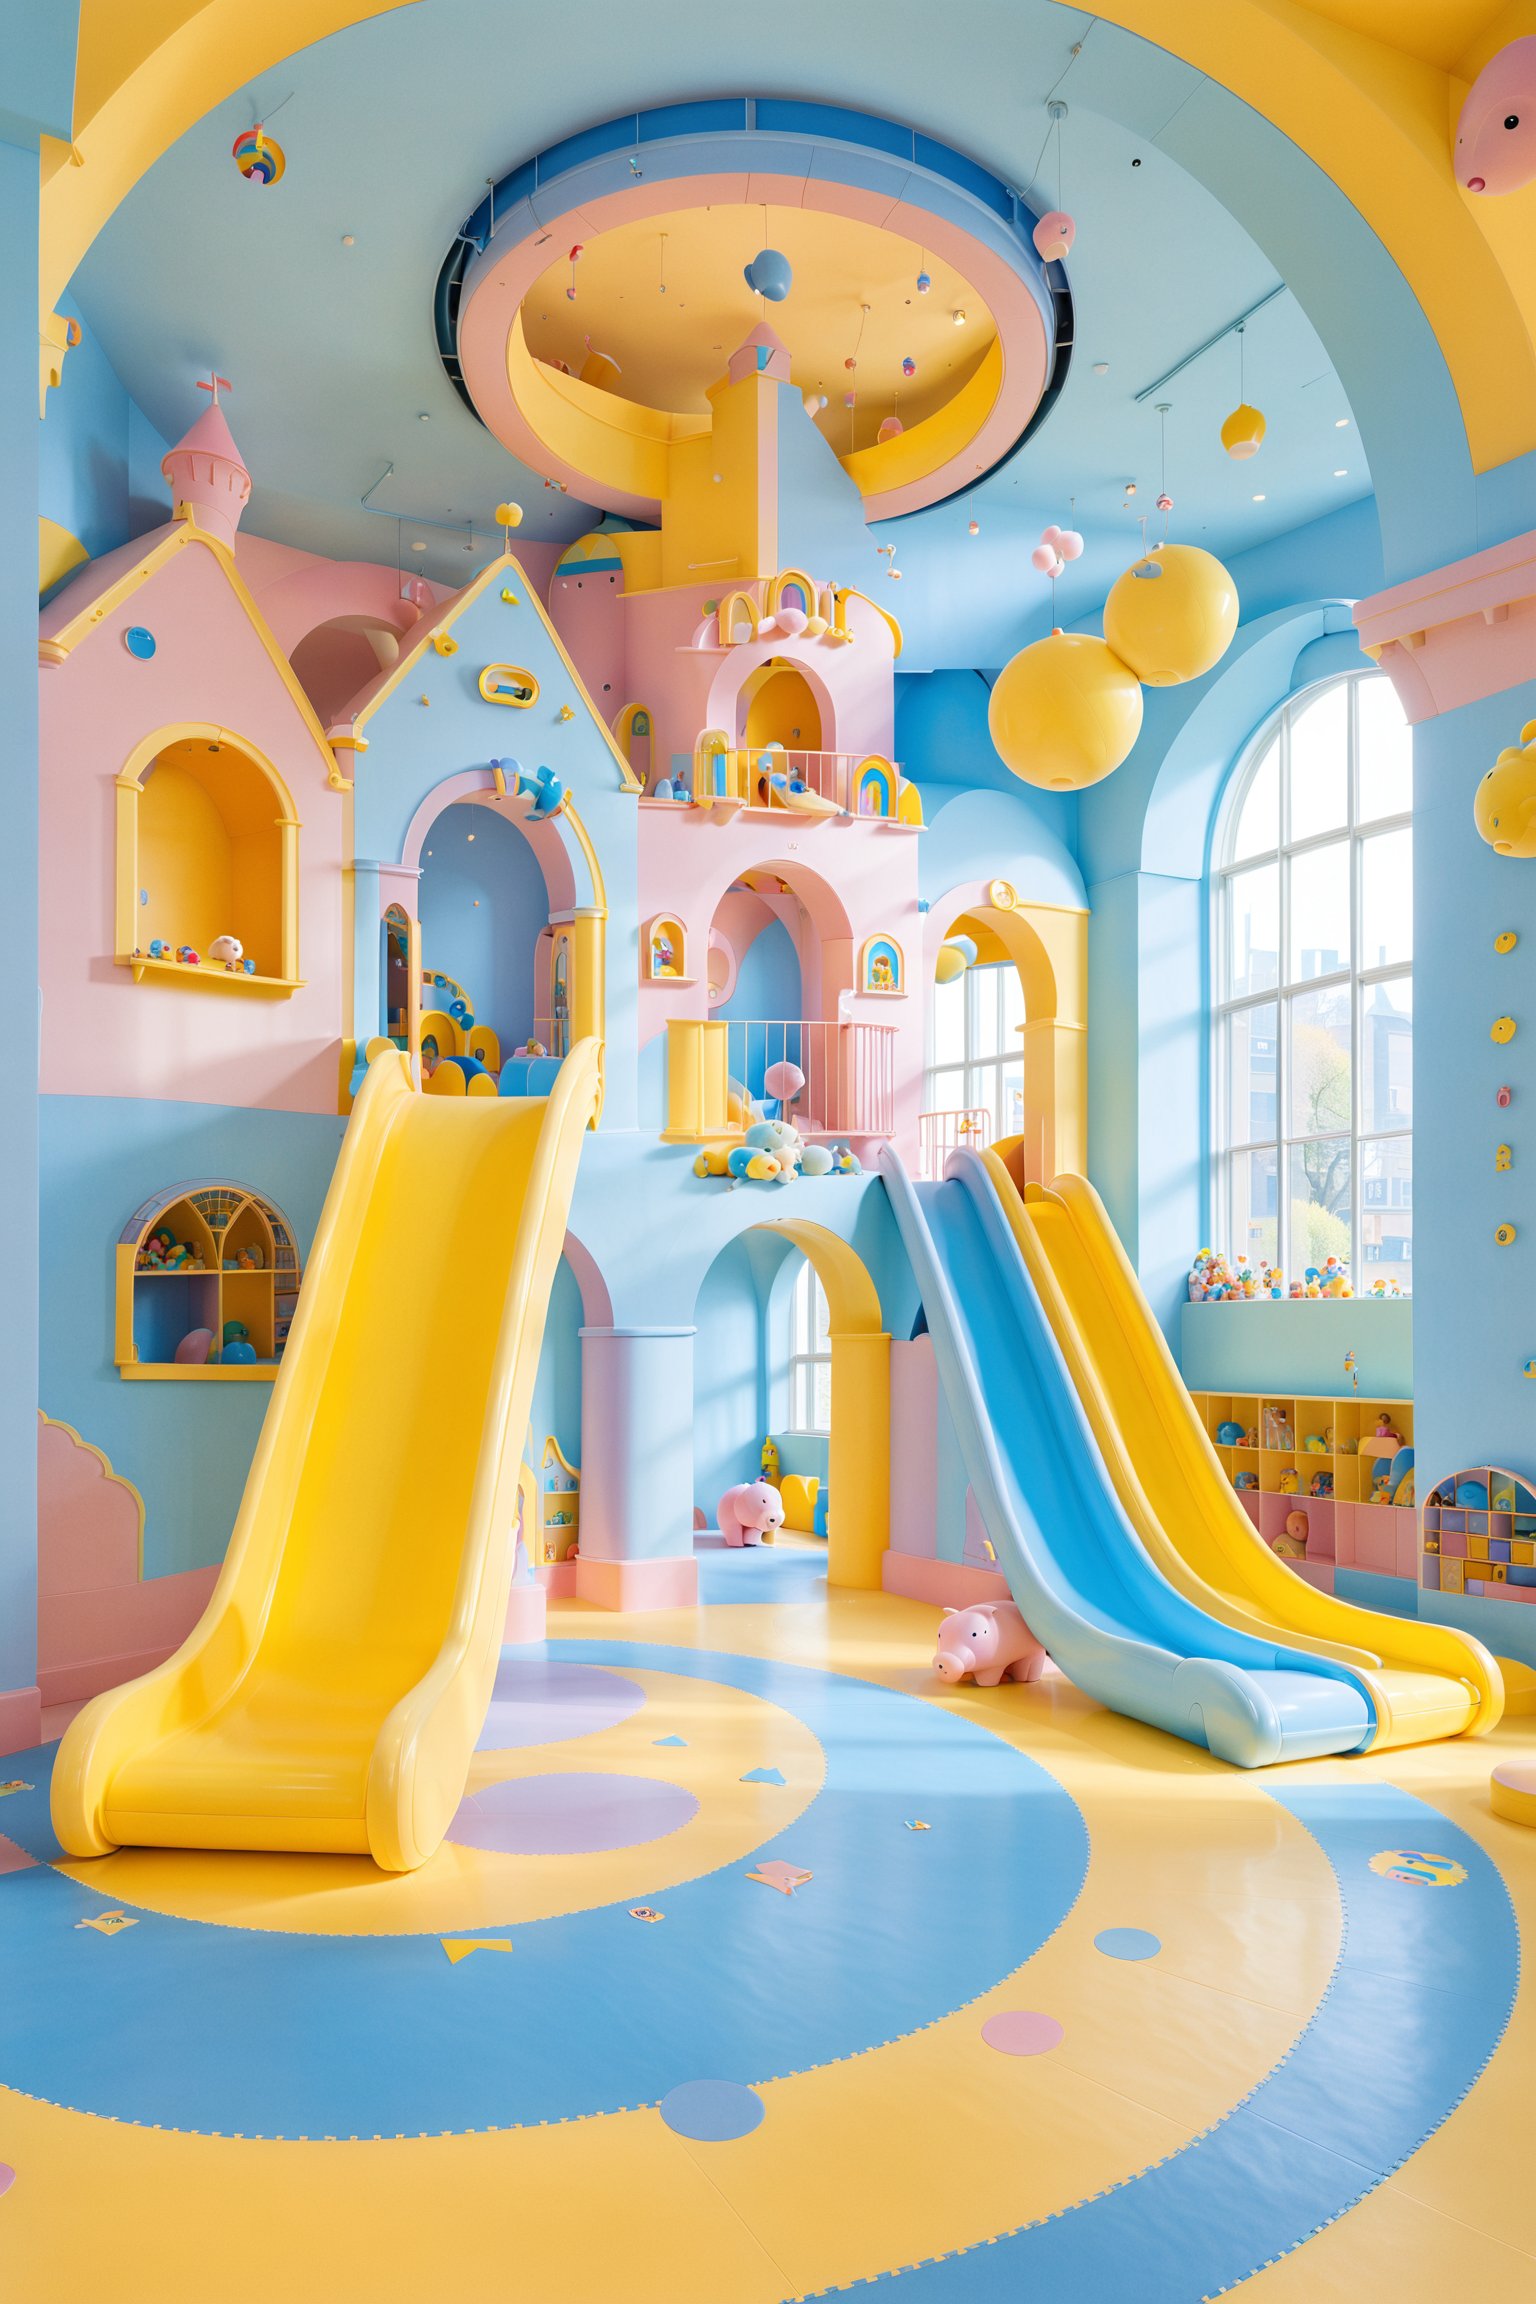 An indoor play area designed with a pastel theme. Dominated by shades of blue and pink, the space features a large yellow slide, a pink castle-like structure with arches, and a playful rainbow arch overhead. Toys, including a teddy bear and a piggy bank, are scattered around. The ceiling is adorned with hanging toys and decorative elements, and there's a large window on the left, allowing natural light to flood in. The floor is a mix of blue and yellow, and there's a circular platform with toys on it.